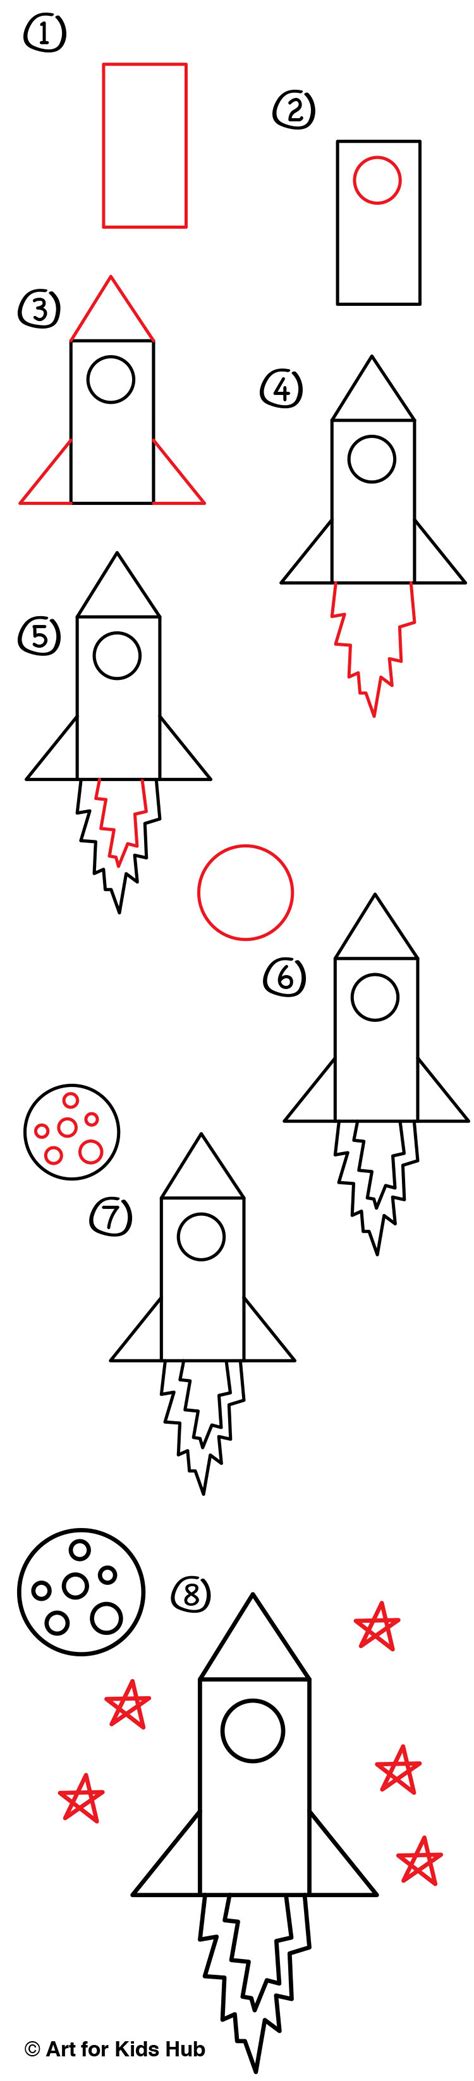 How To Draw A Rocket (Young Artists) - Art For Kids Hub